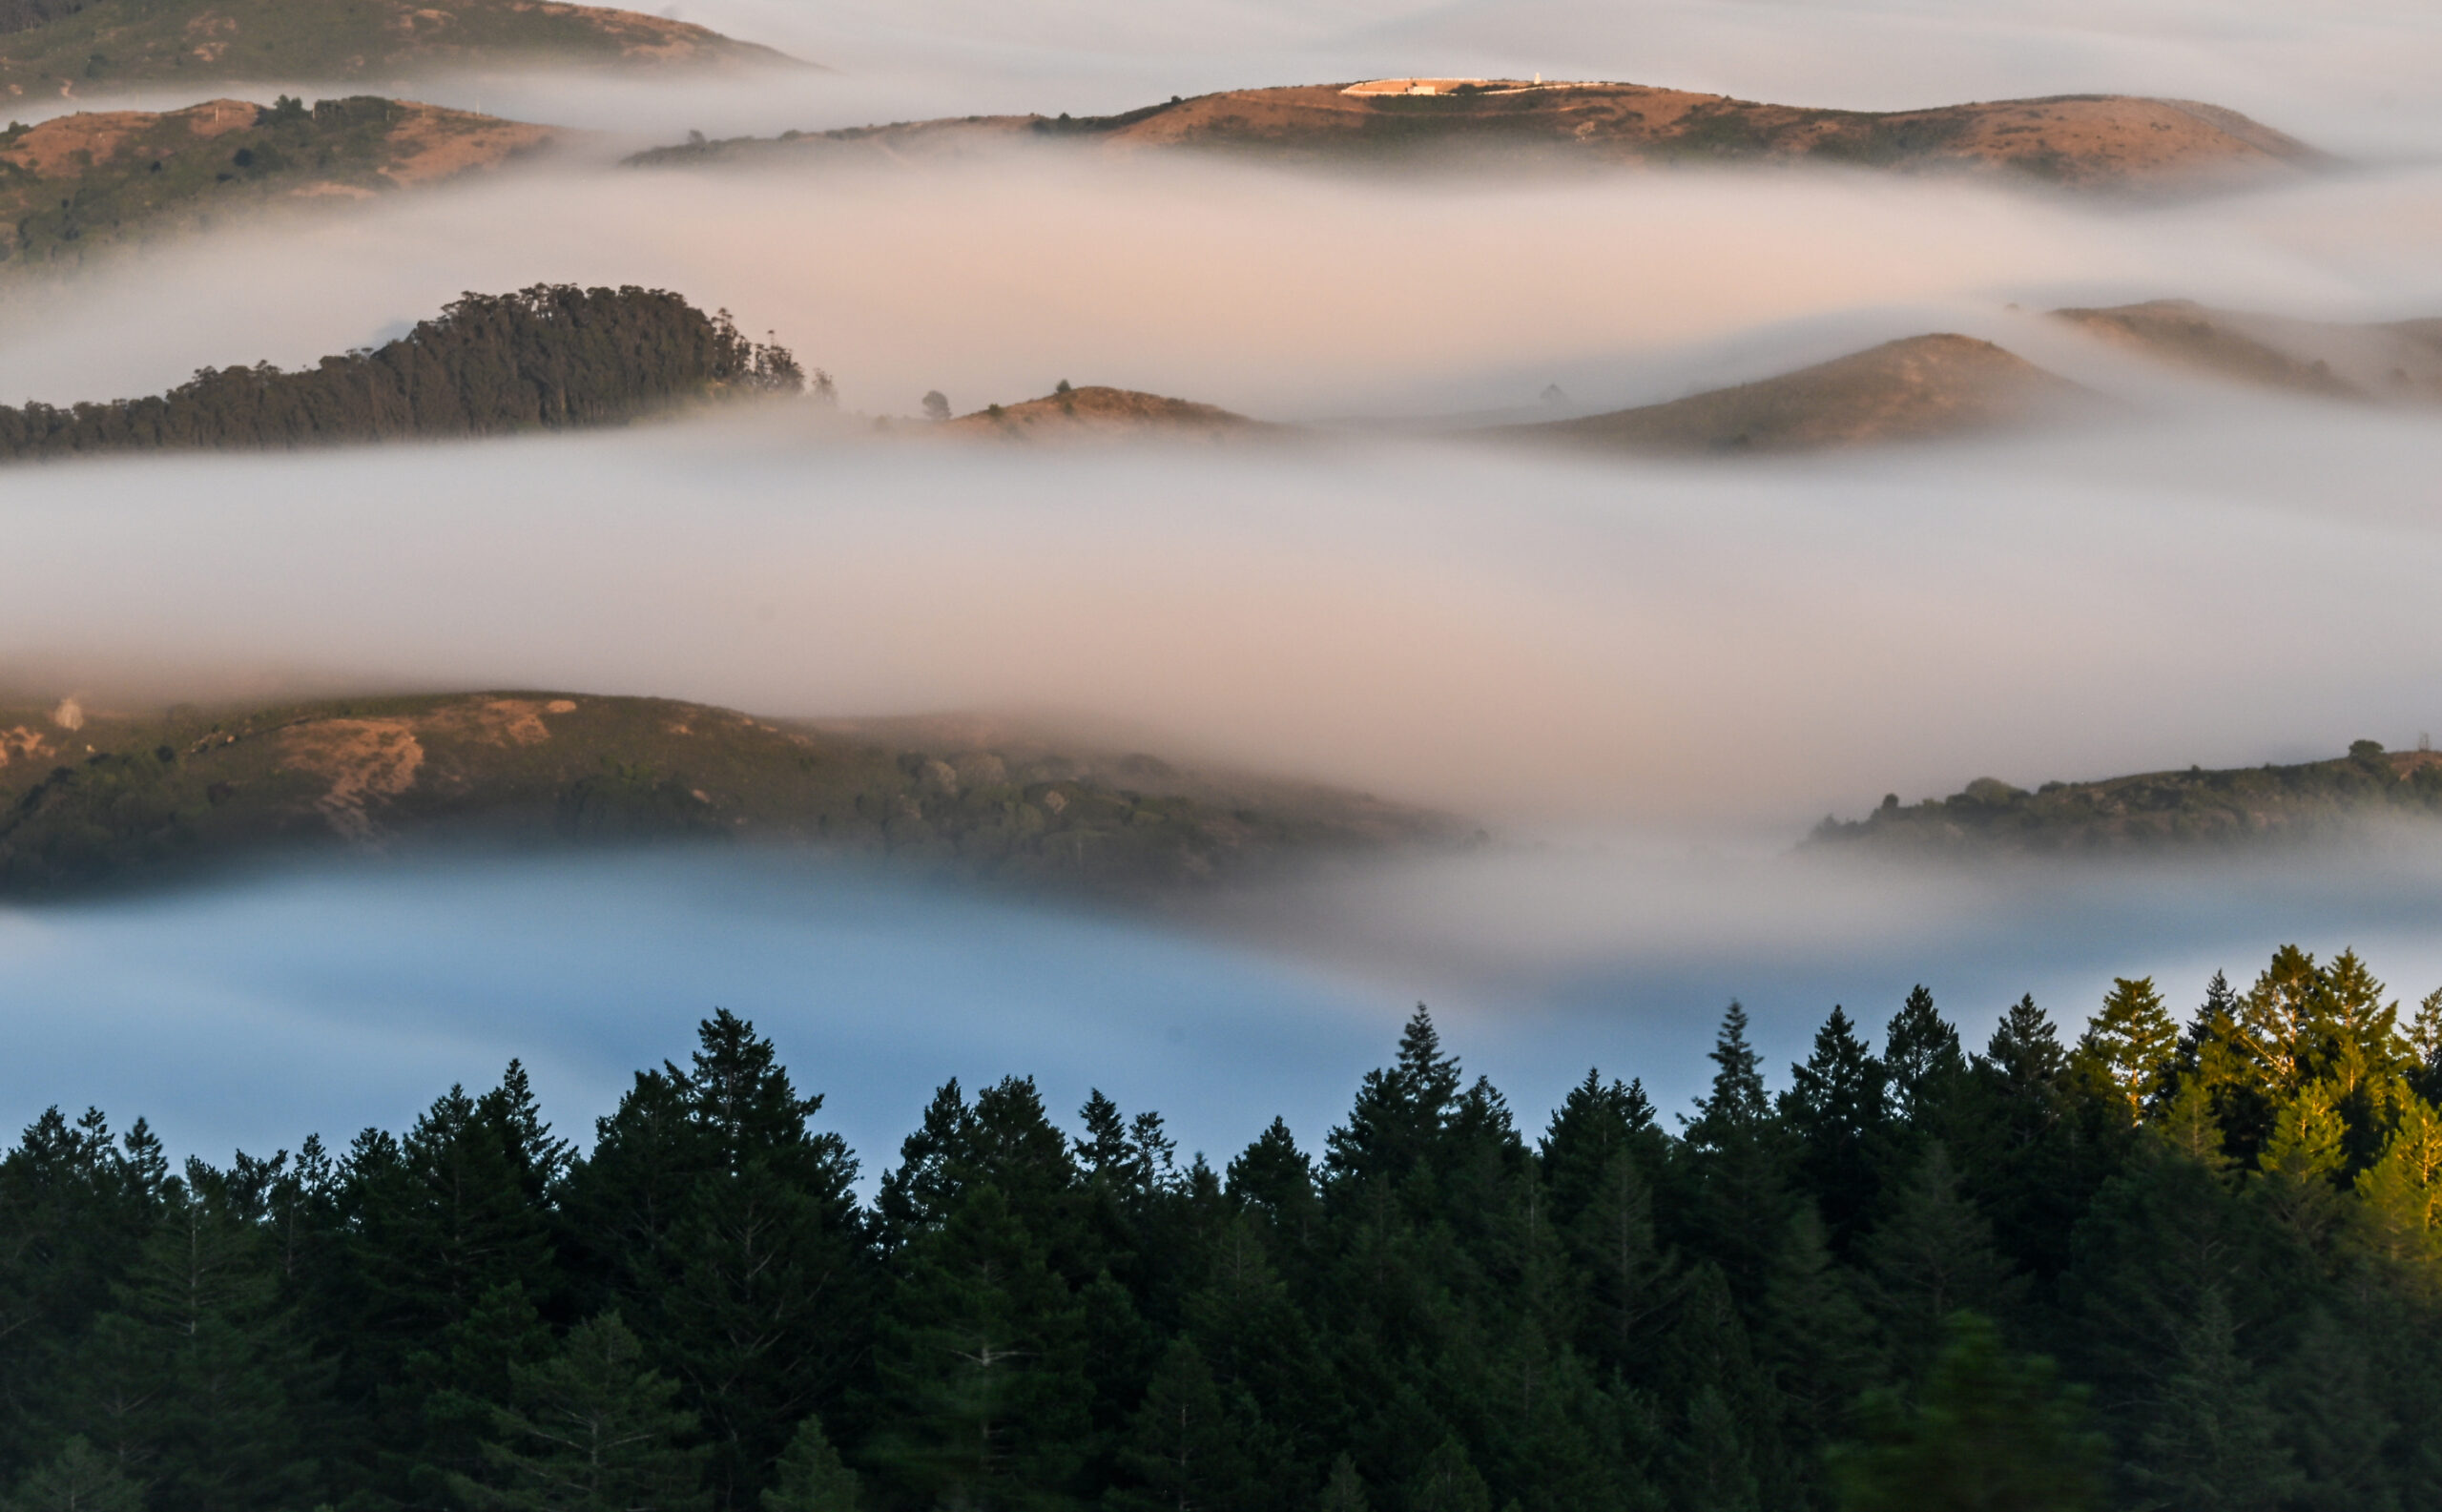 Distant mountains enveloped in low fog with a row of conifers in the foreground